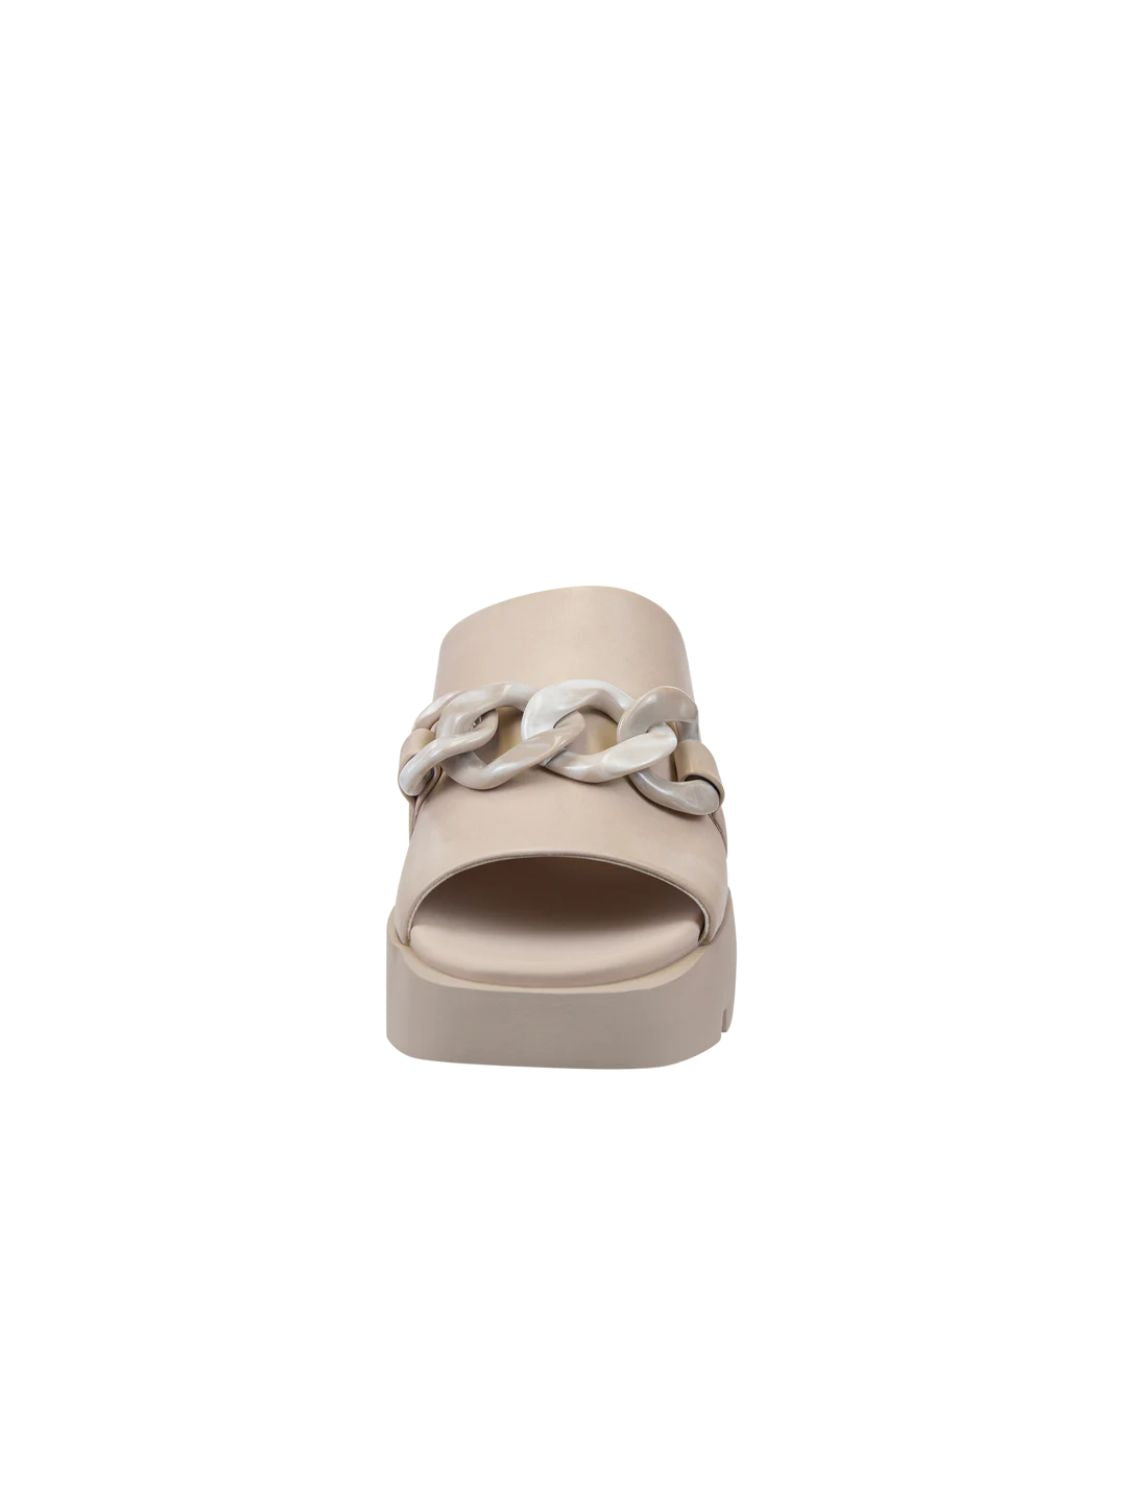 naked feet iso chain platform sandal beige-front view